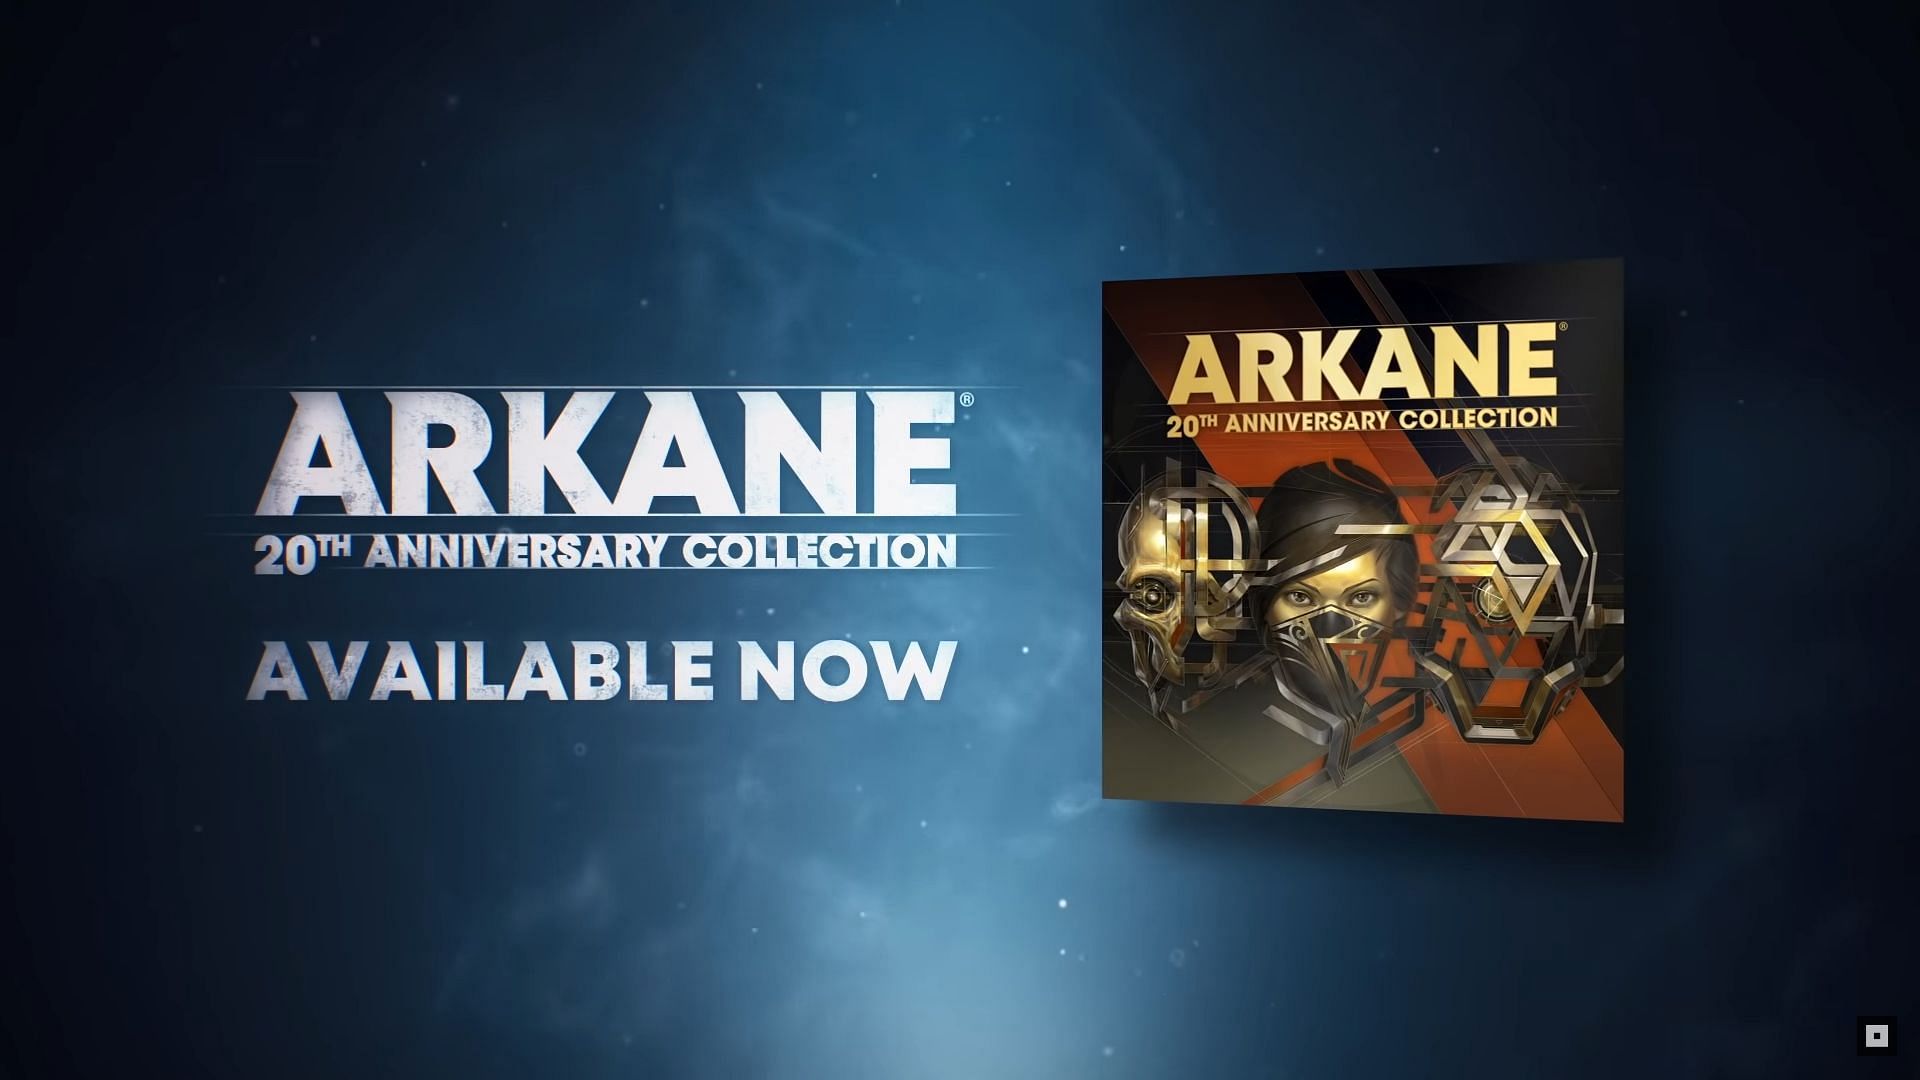 The Arkane 20th Anniversary Collection combines several great titles under one game bundle (Image via Arkane/Bethesda)